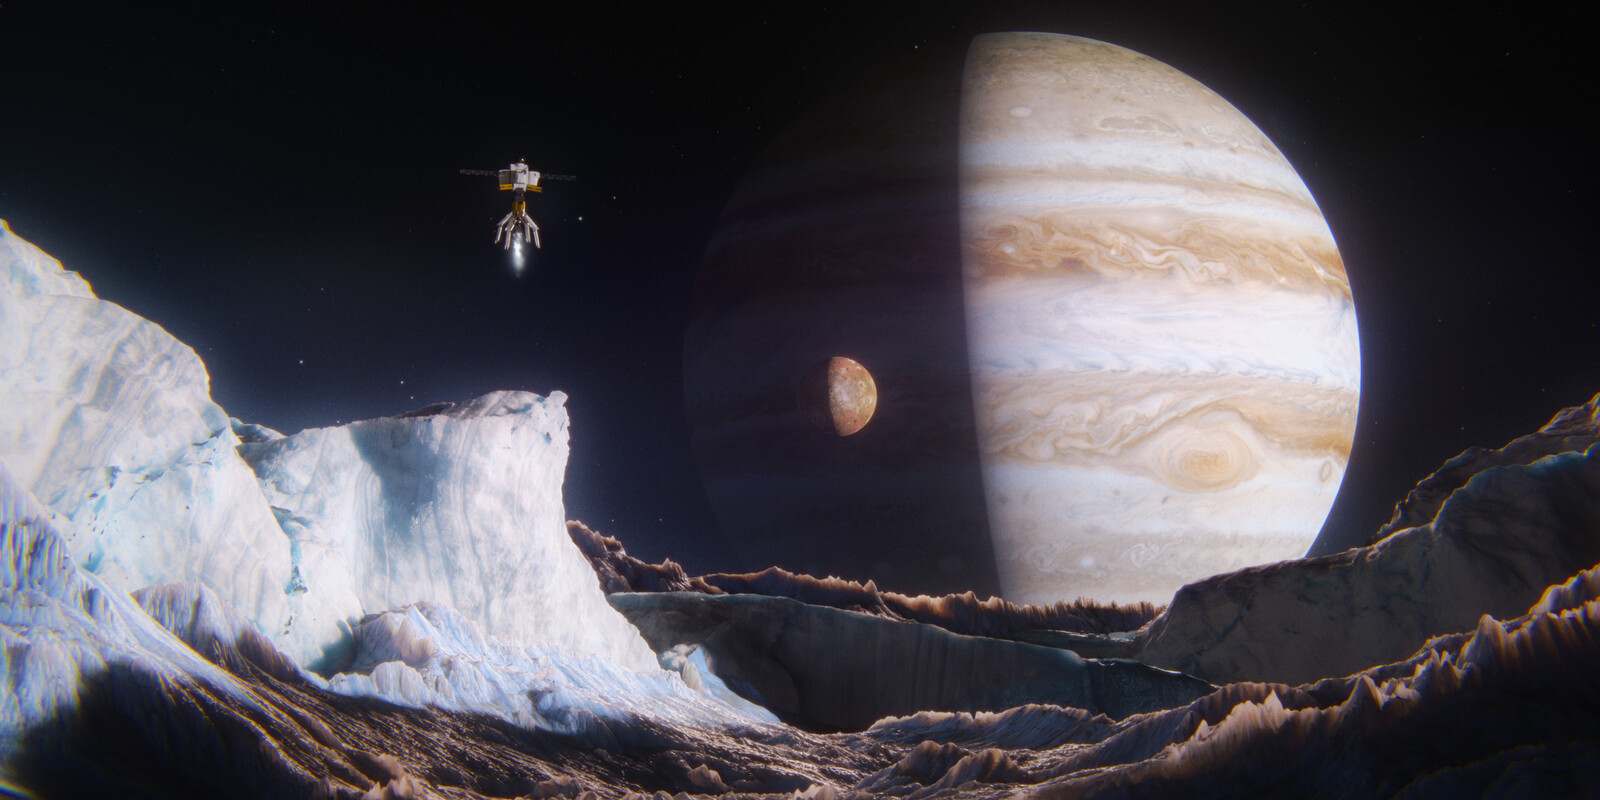 A view from Europa